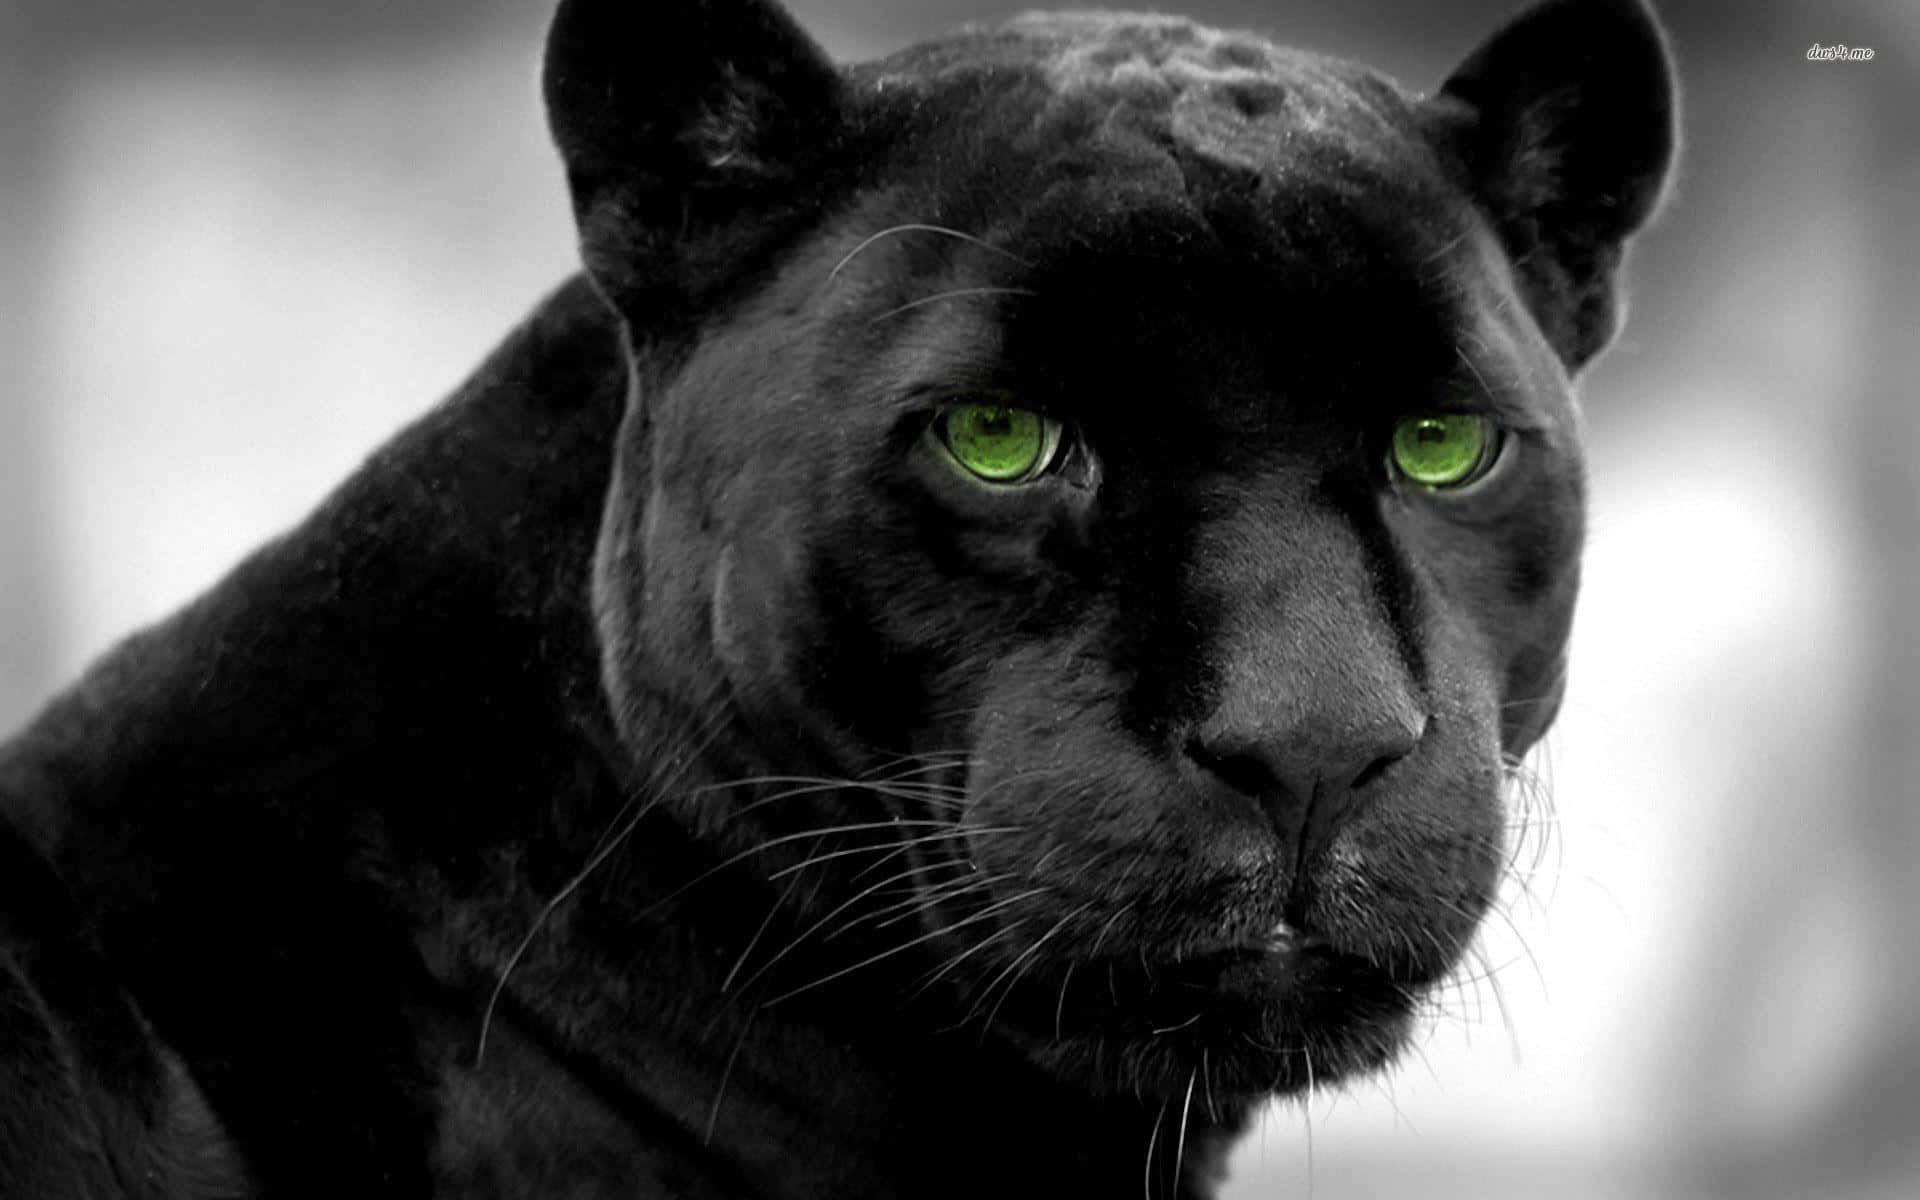 Wild Black Leopard Background, Pictures Of Panthers In The Wild, Animal,  Panther Background Image And Wallpaper for Free Download